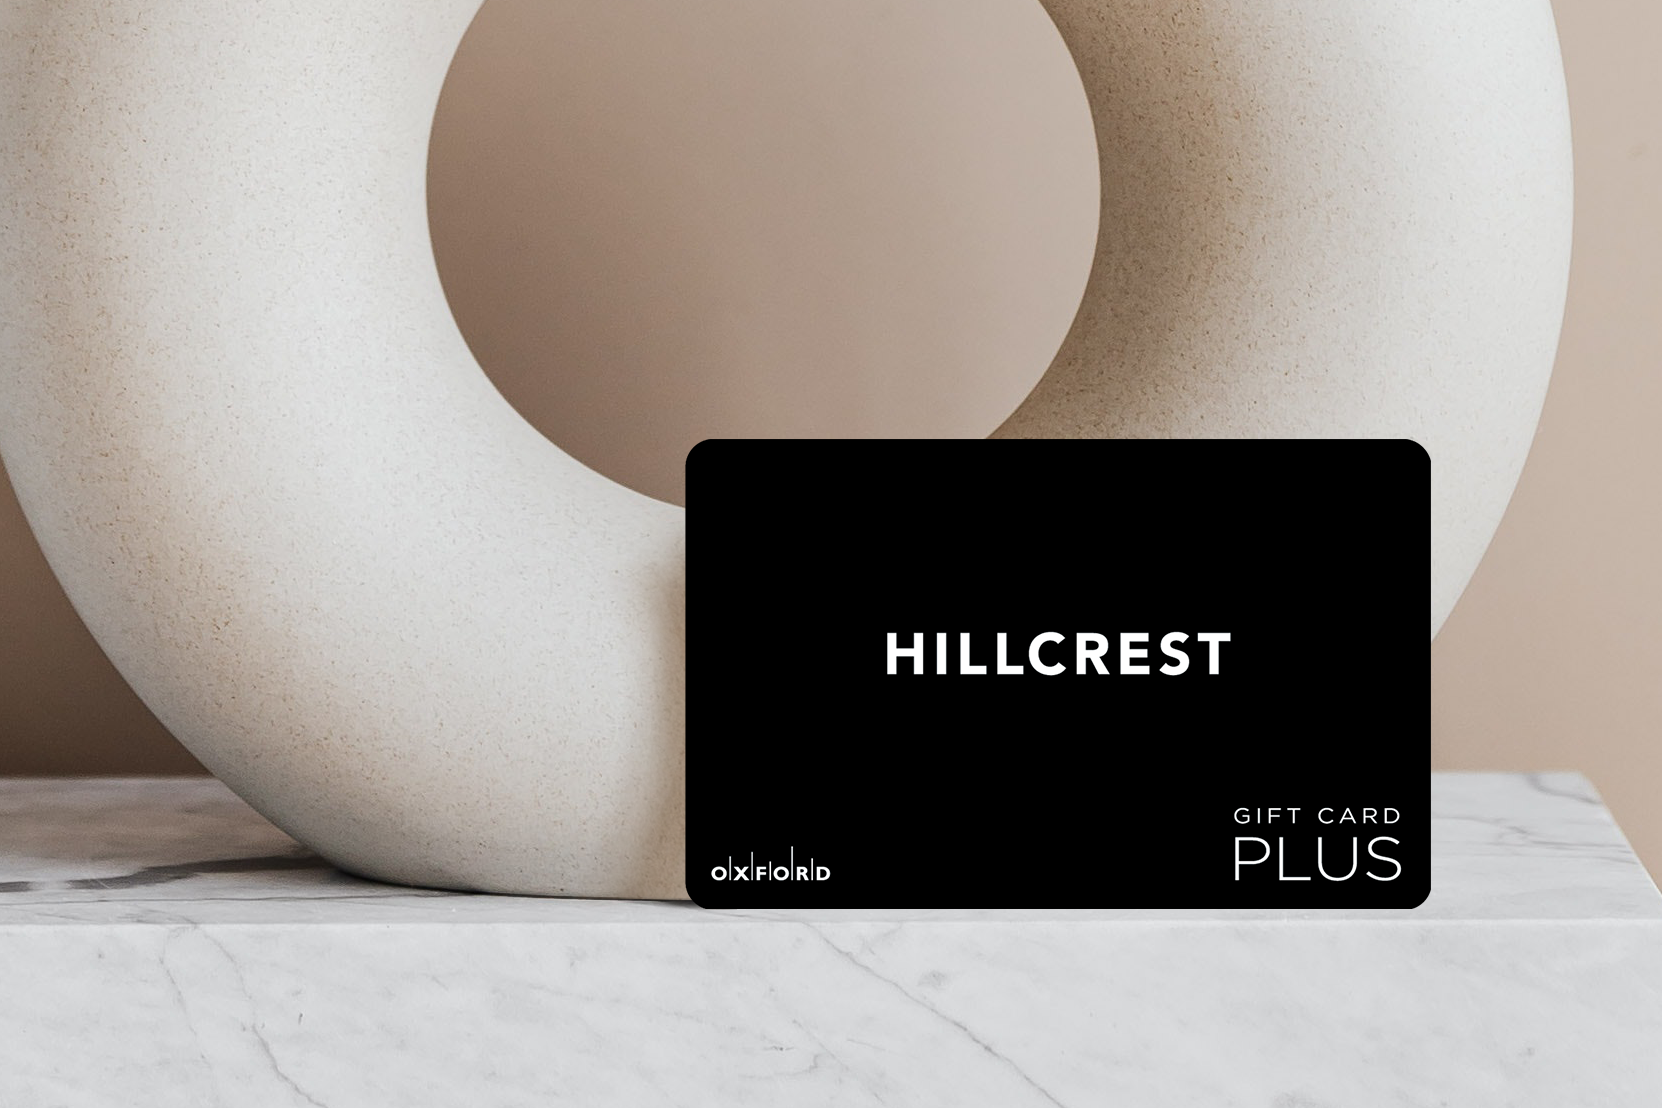 promotional image of a black hillcrest gift card in front of an oval ceramic vase